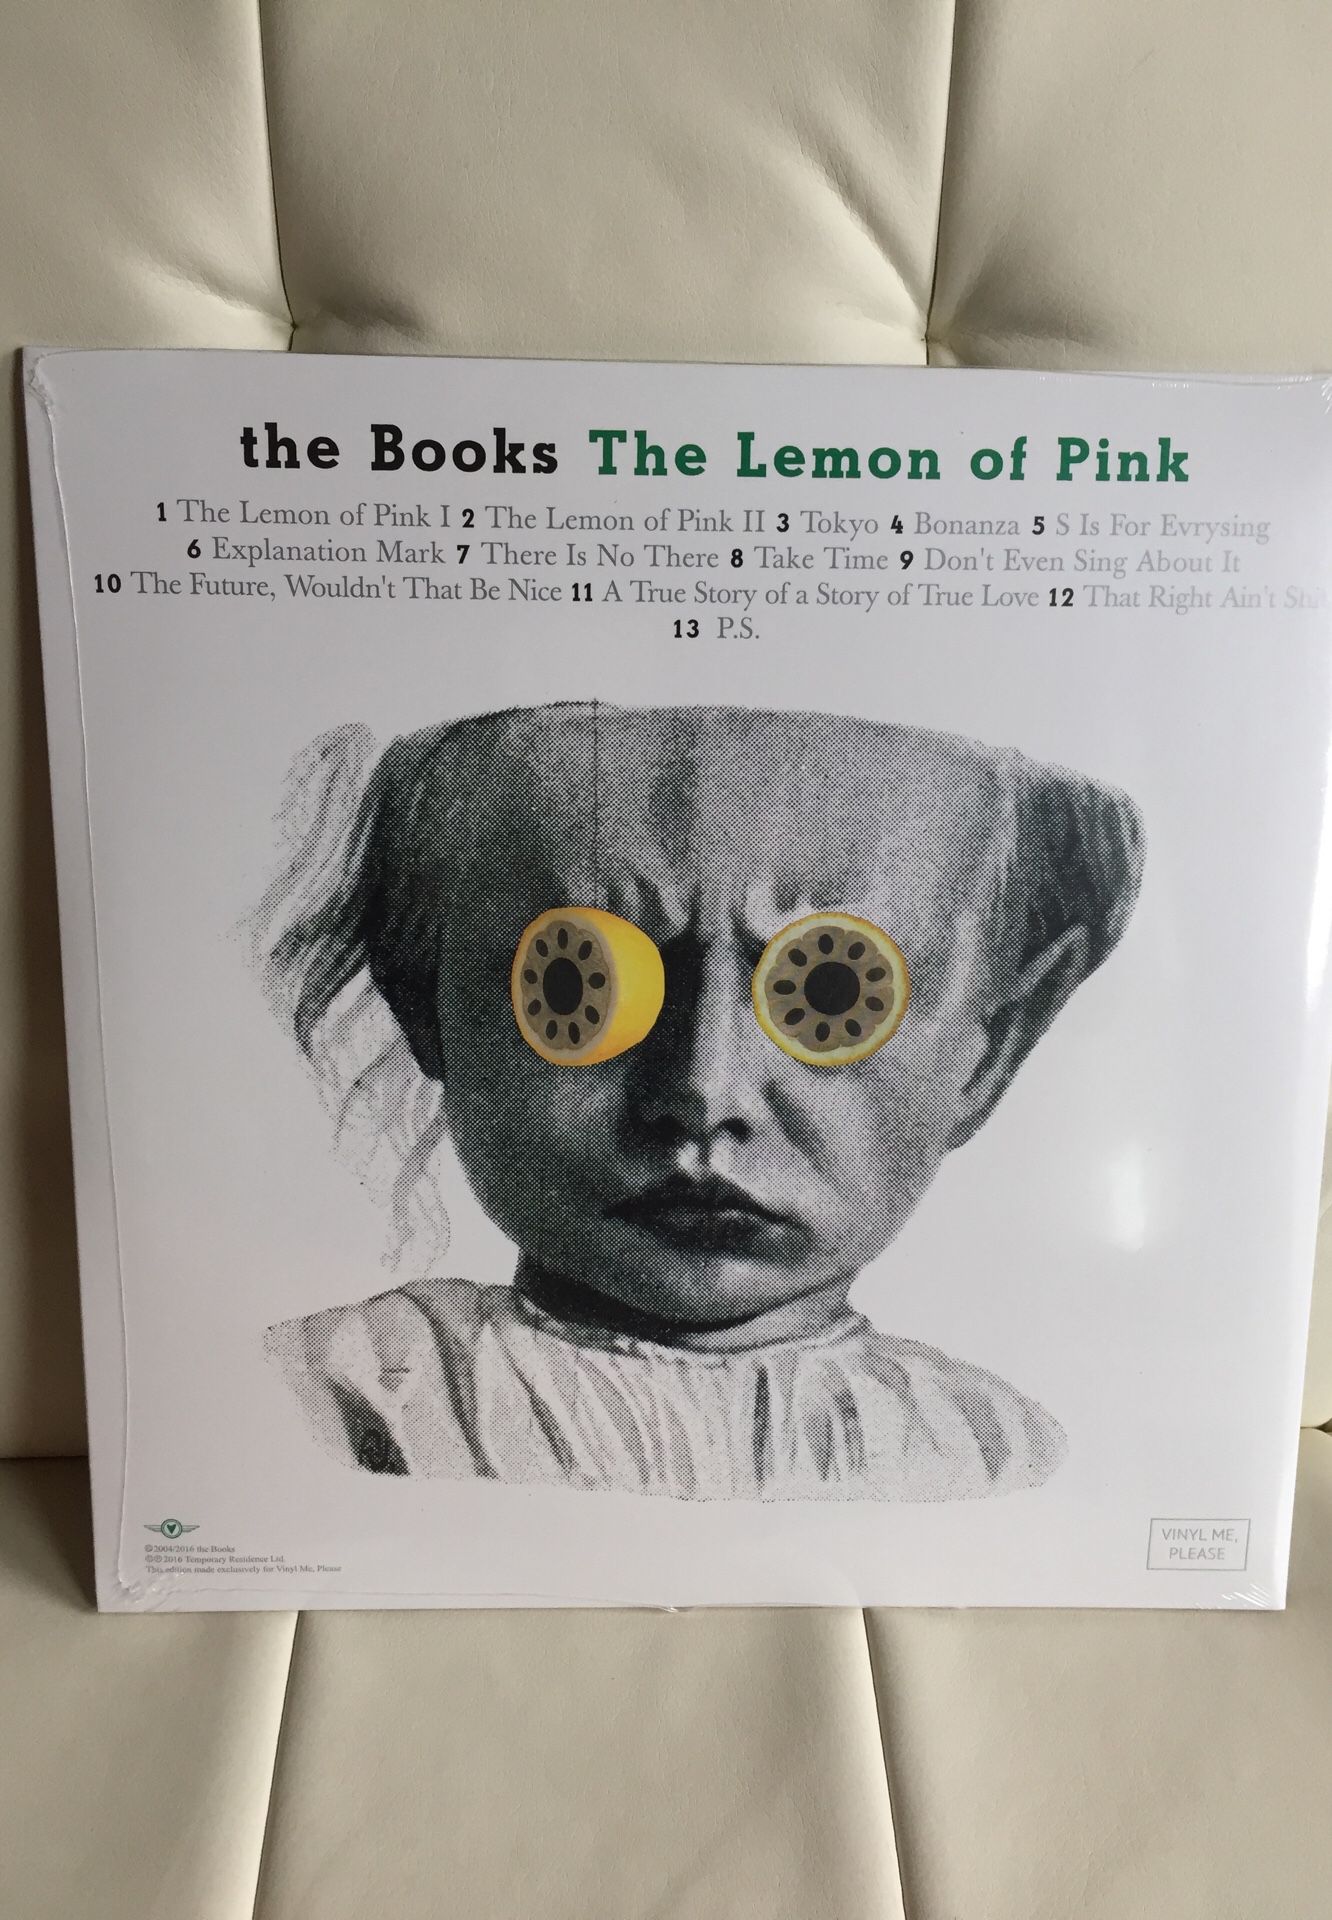 The Books - The Lemon of Pink